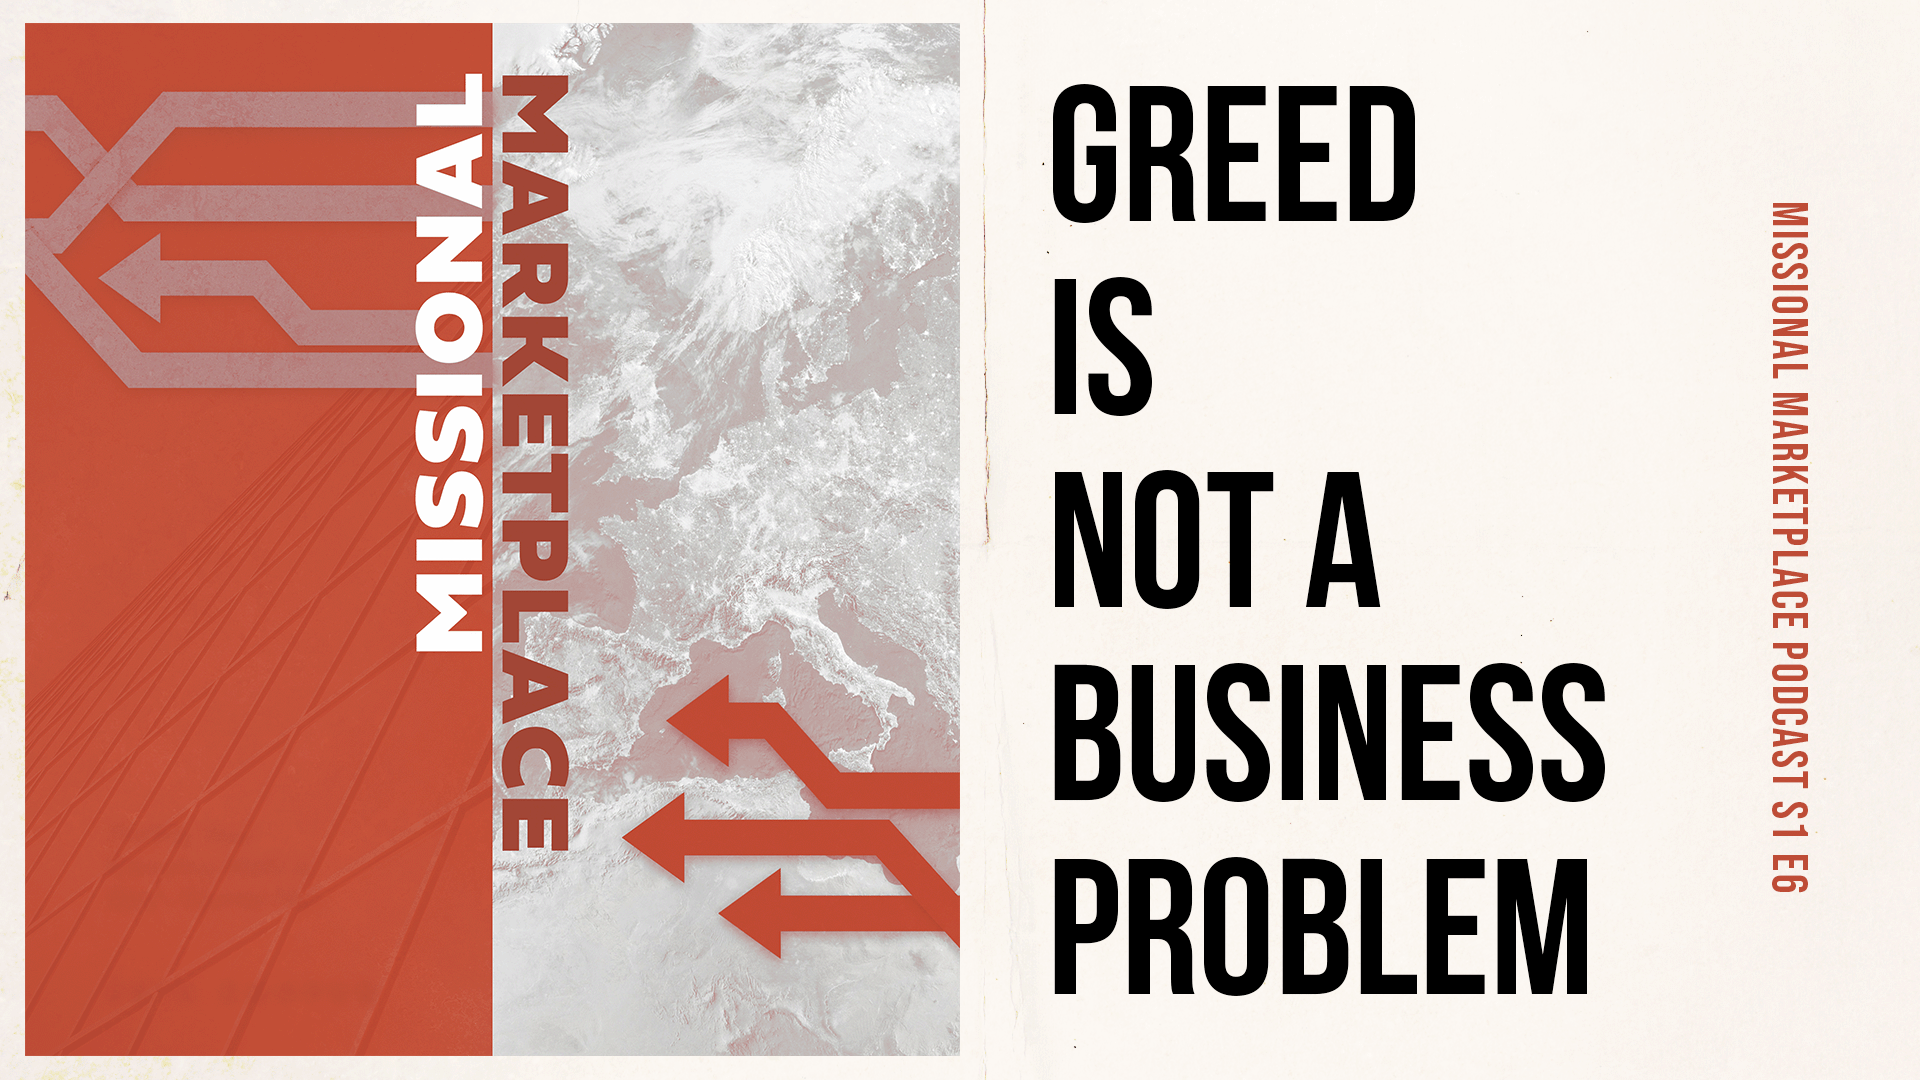 Greed is not a business problem